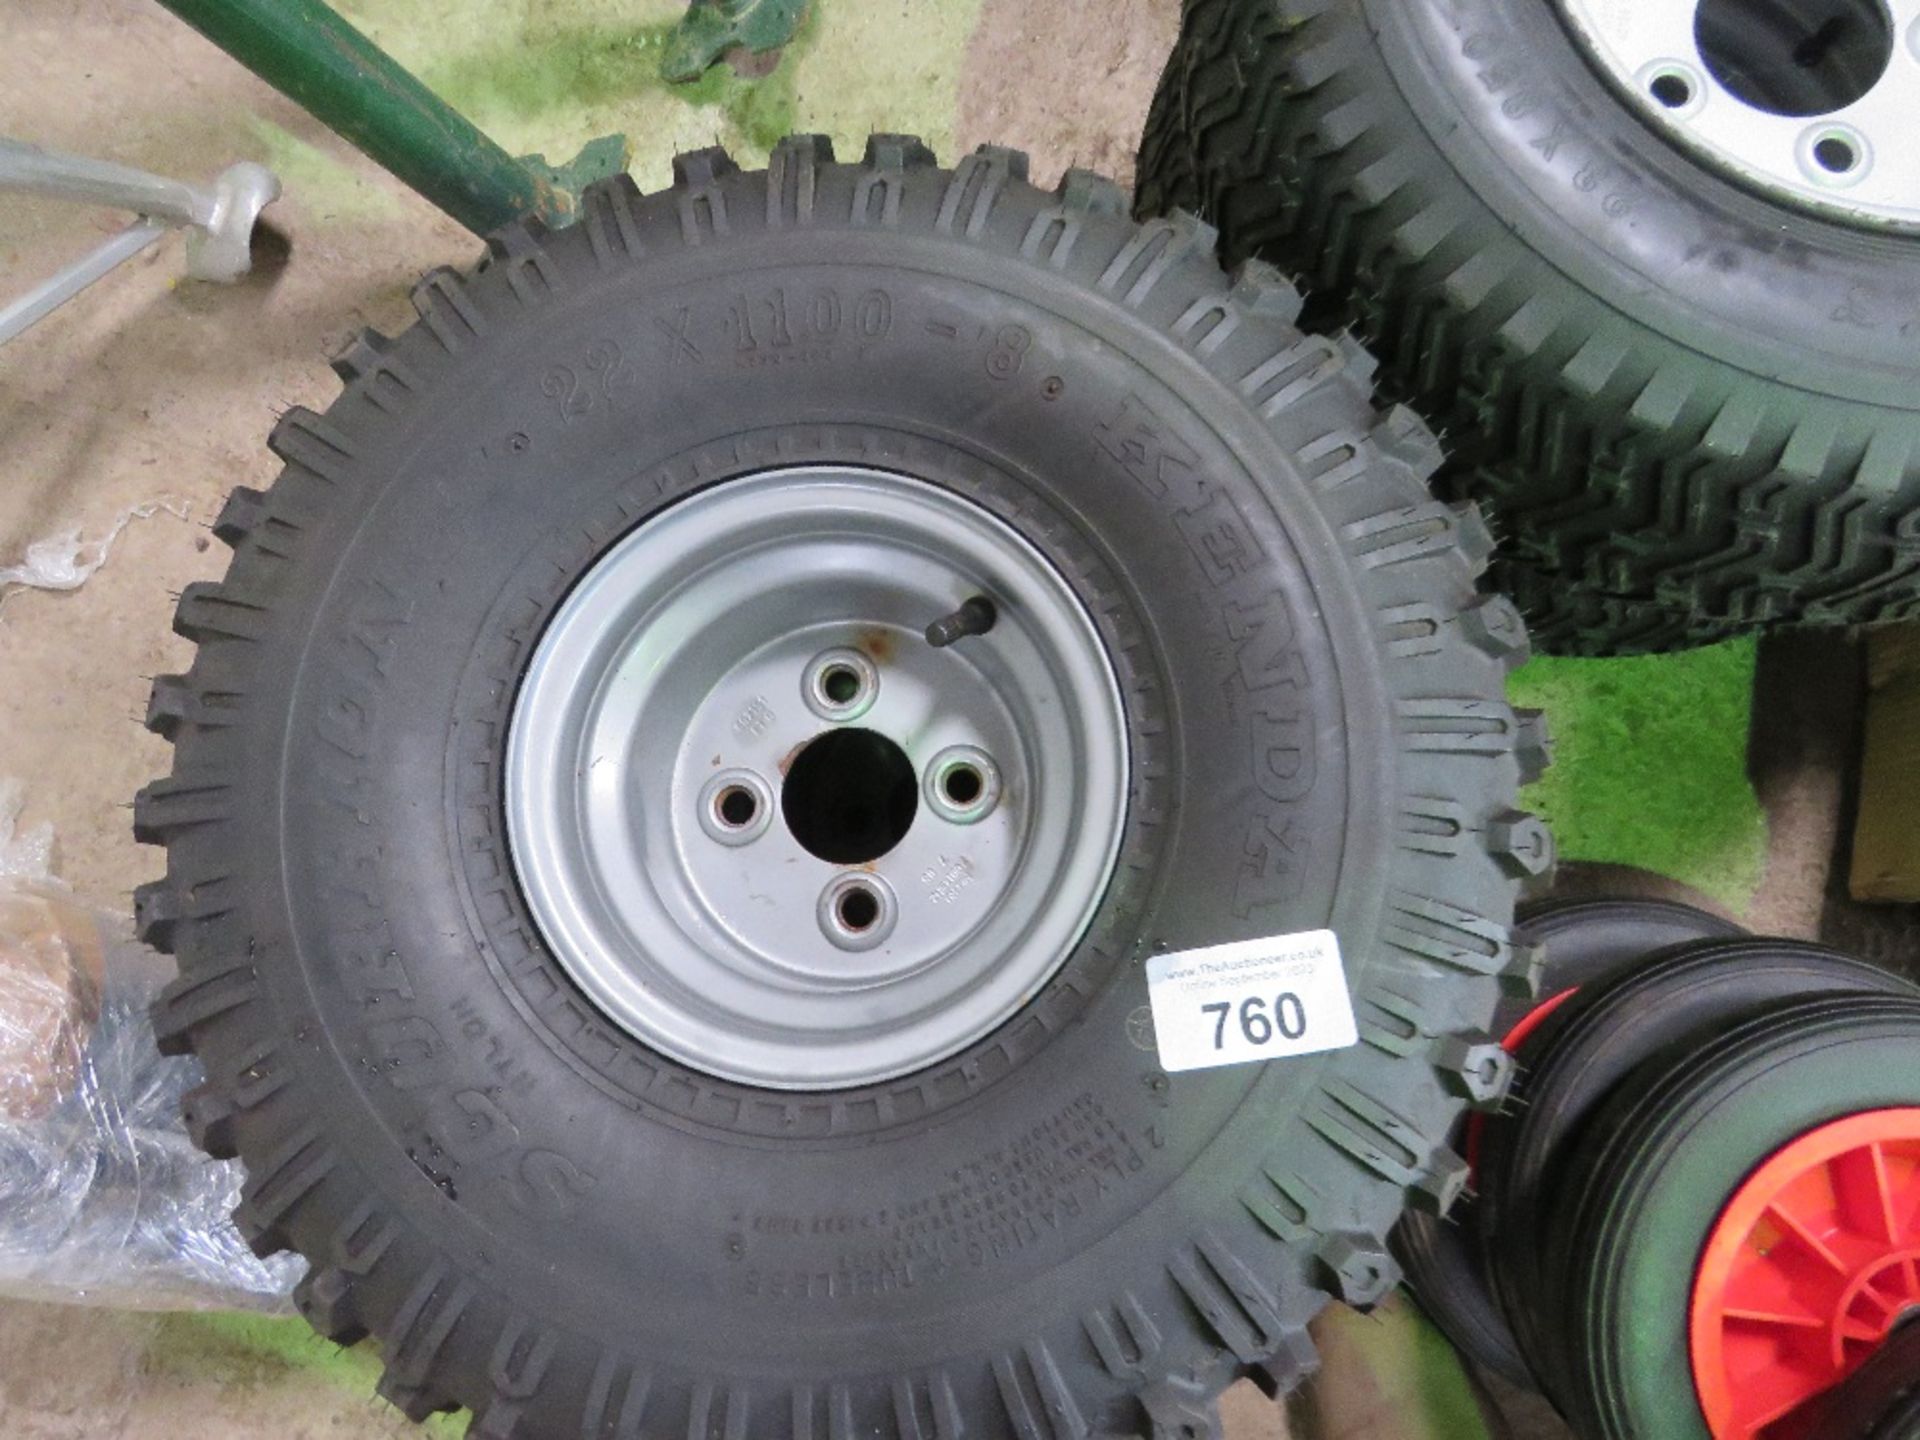 2 X 4 STUD WHEELS AND TYRES, 22X11.00 SIZE. - Image 2 of 4